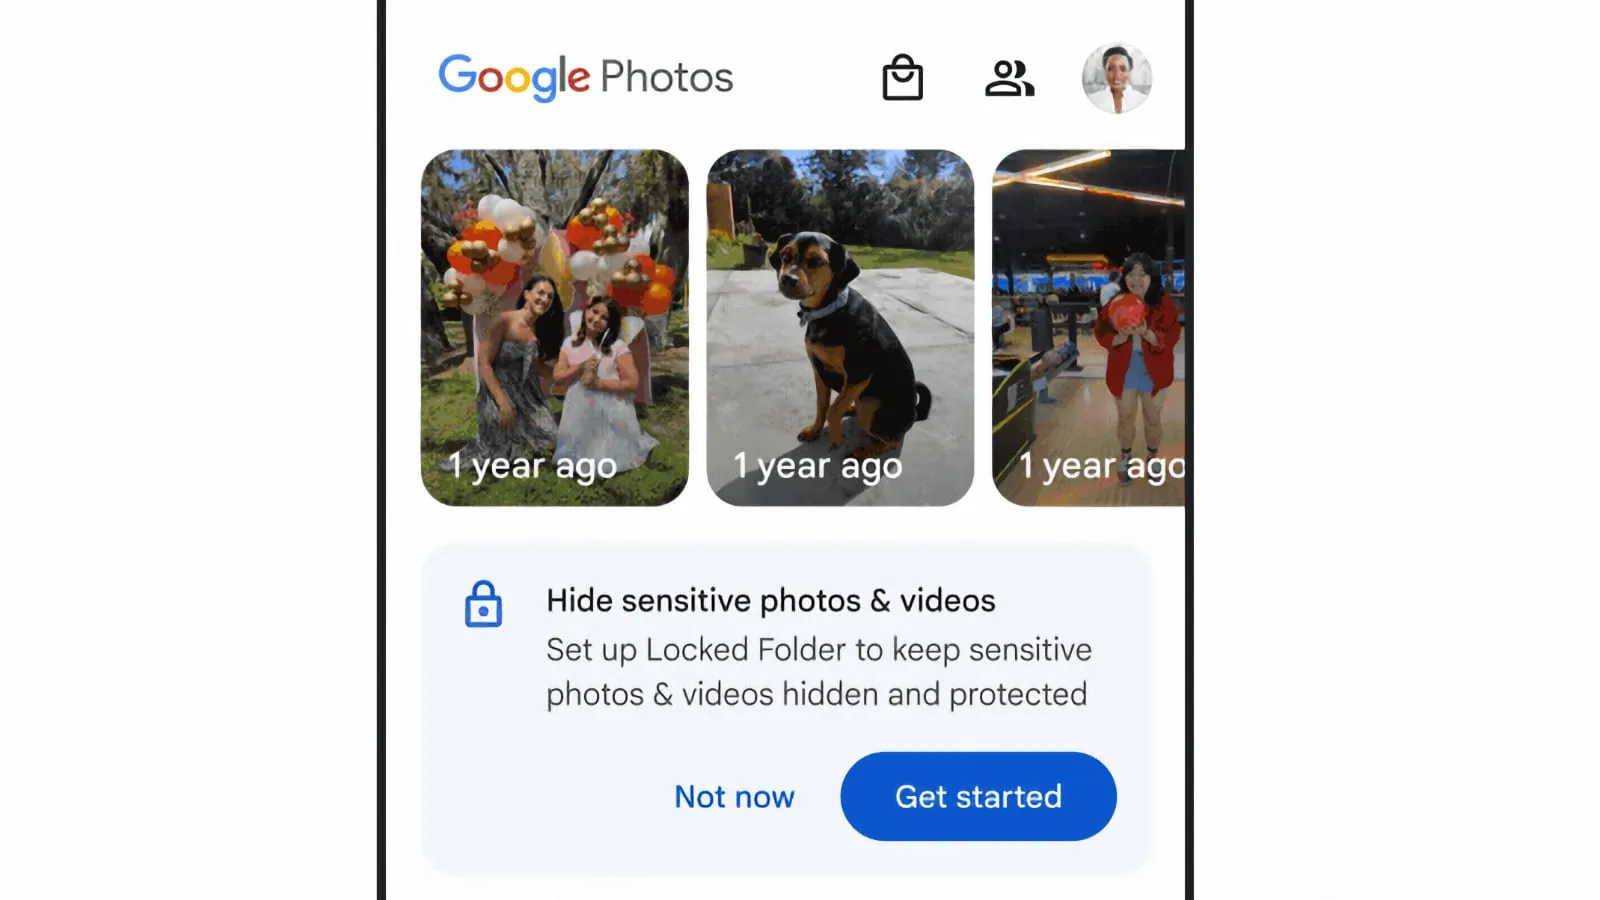 Prompt in the Google Photos app to turn on the Locked Folder feature 